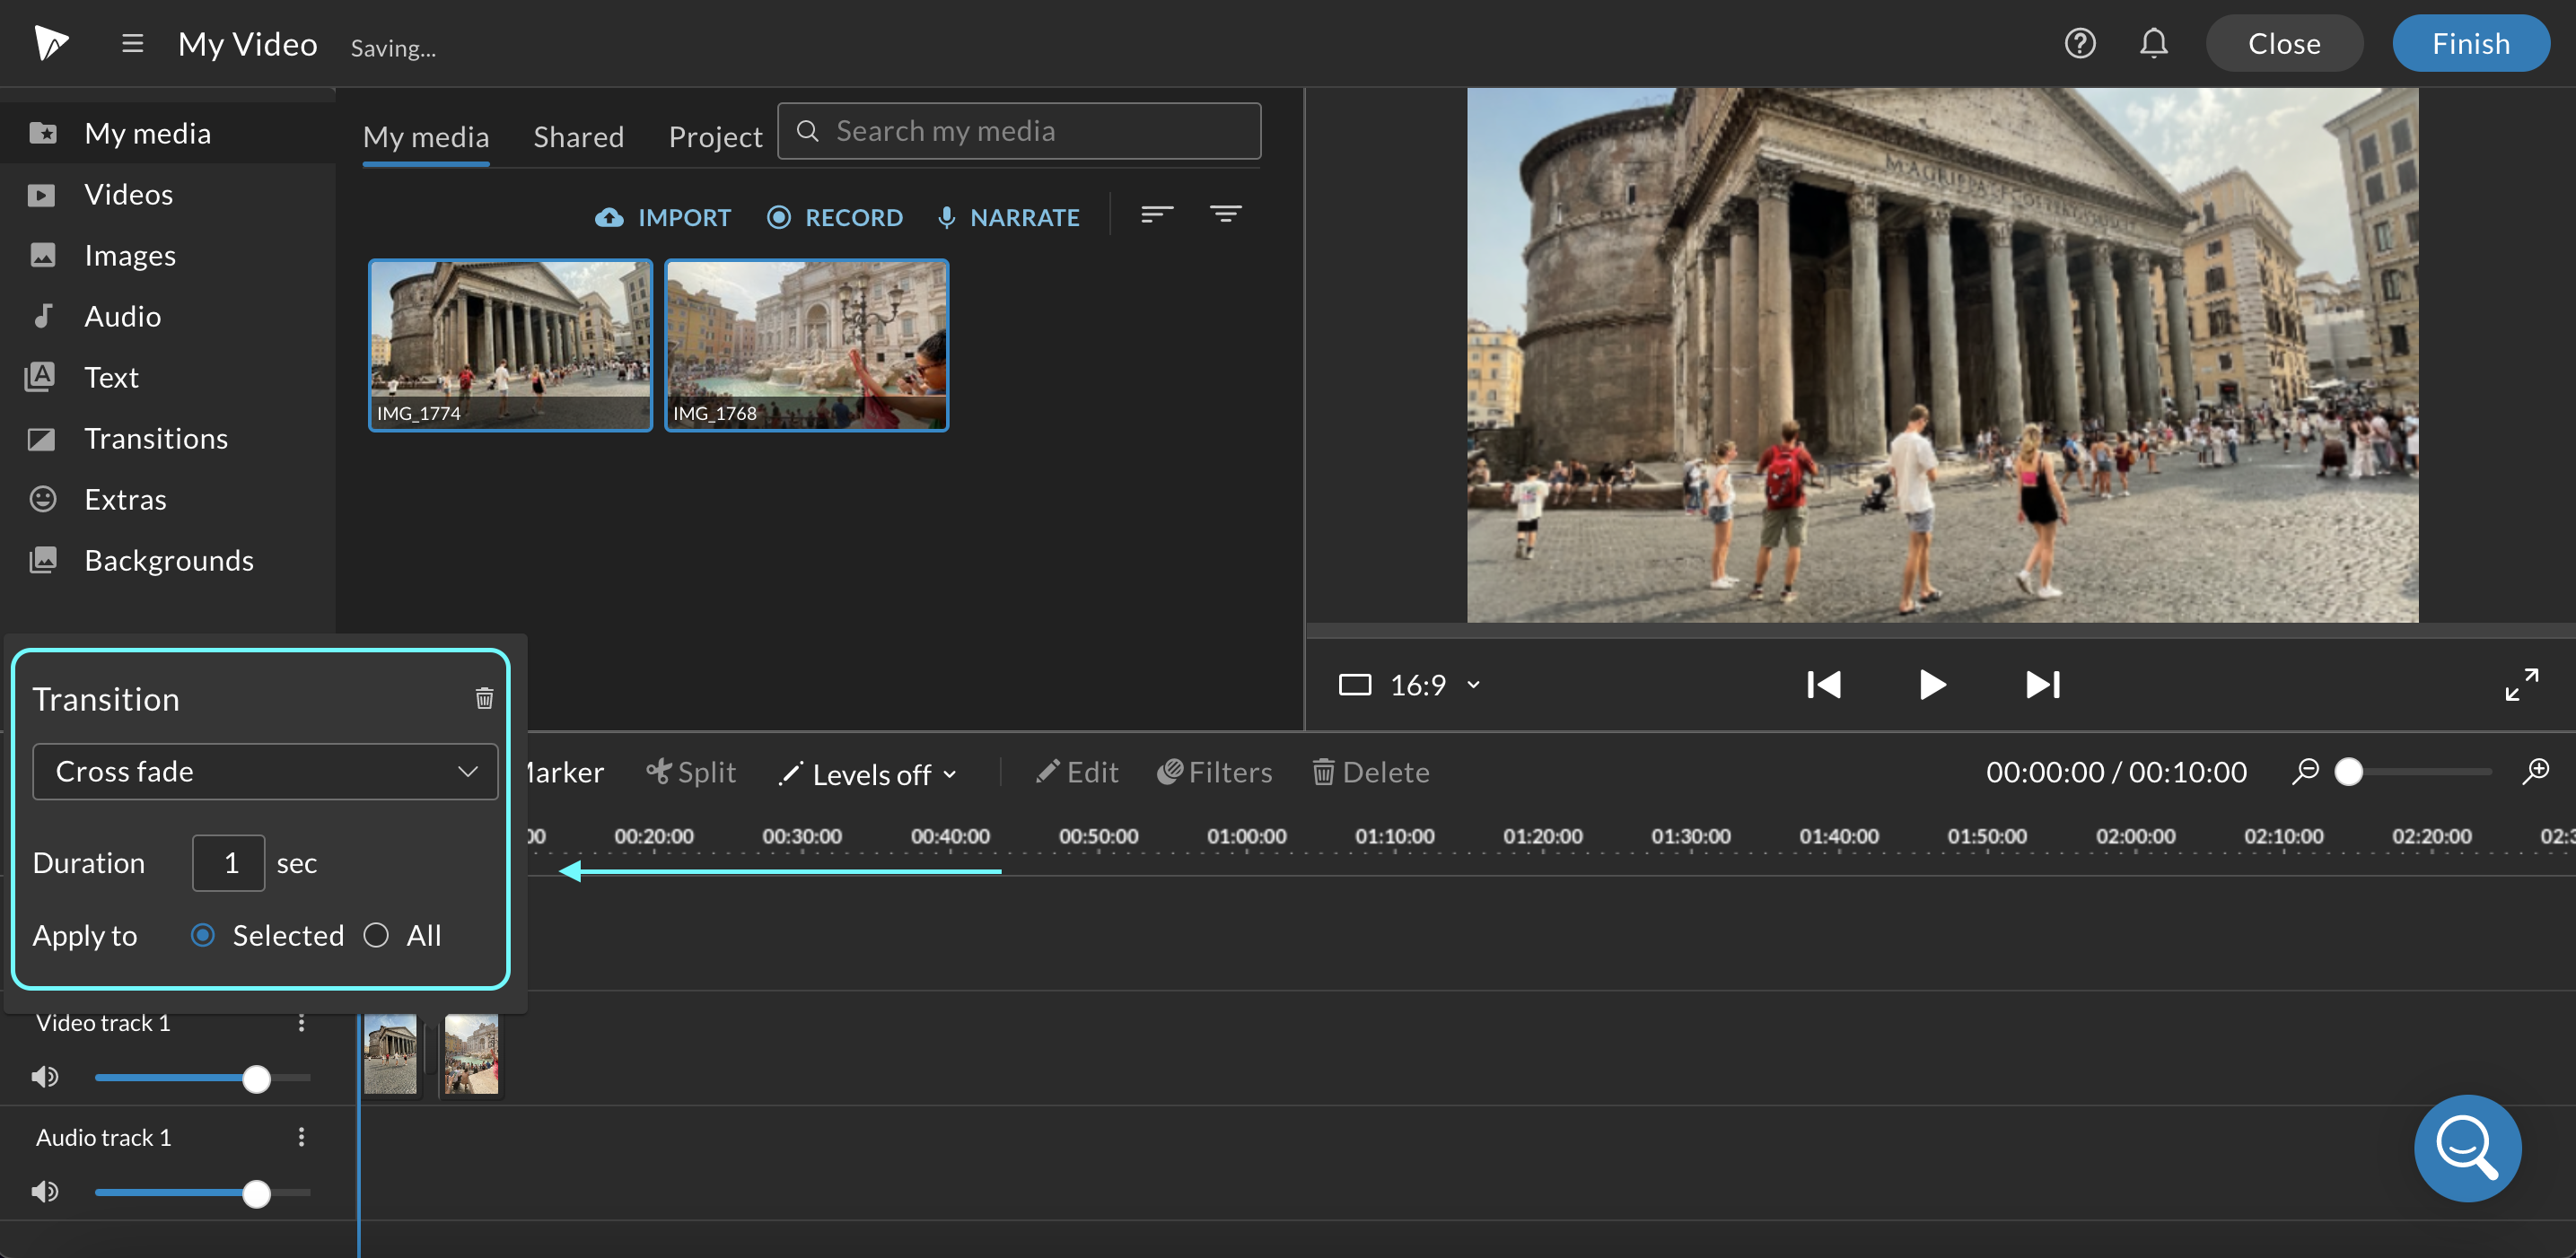 Blue arrow pointing towards the "Transition" pop-up window in the WeVideo timeline editor.